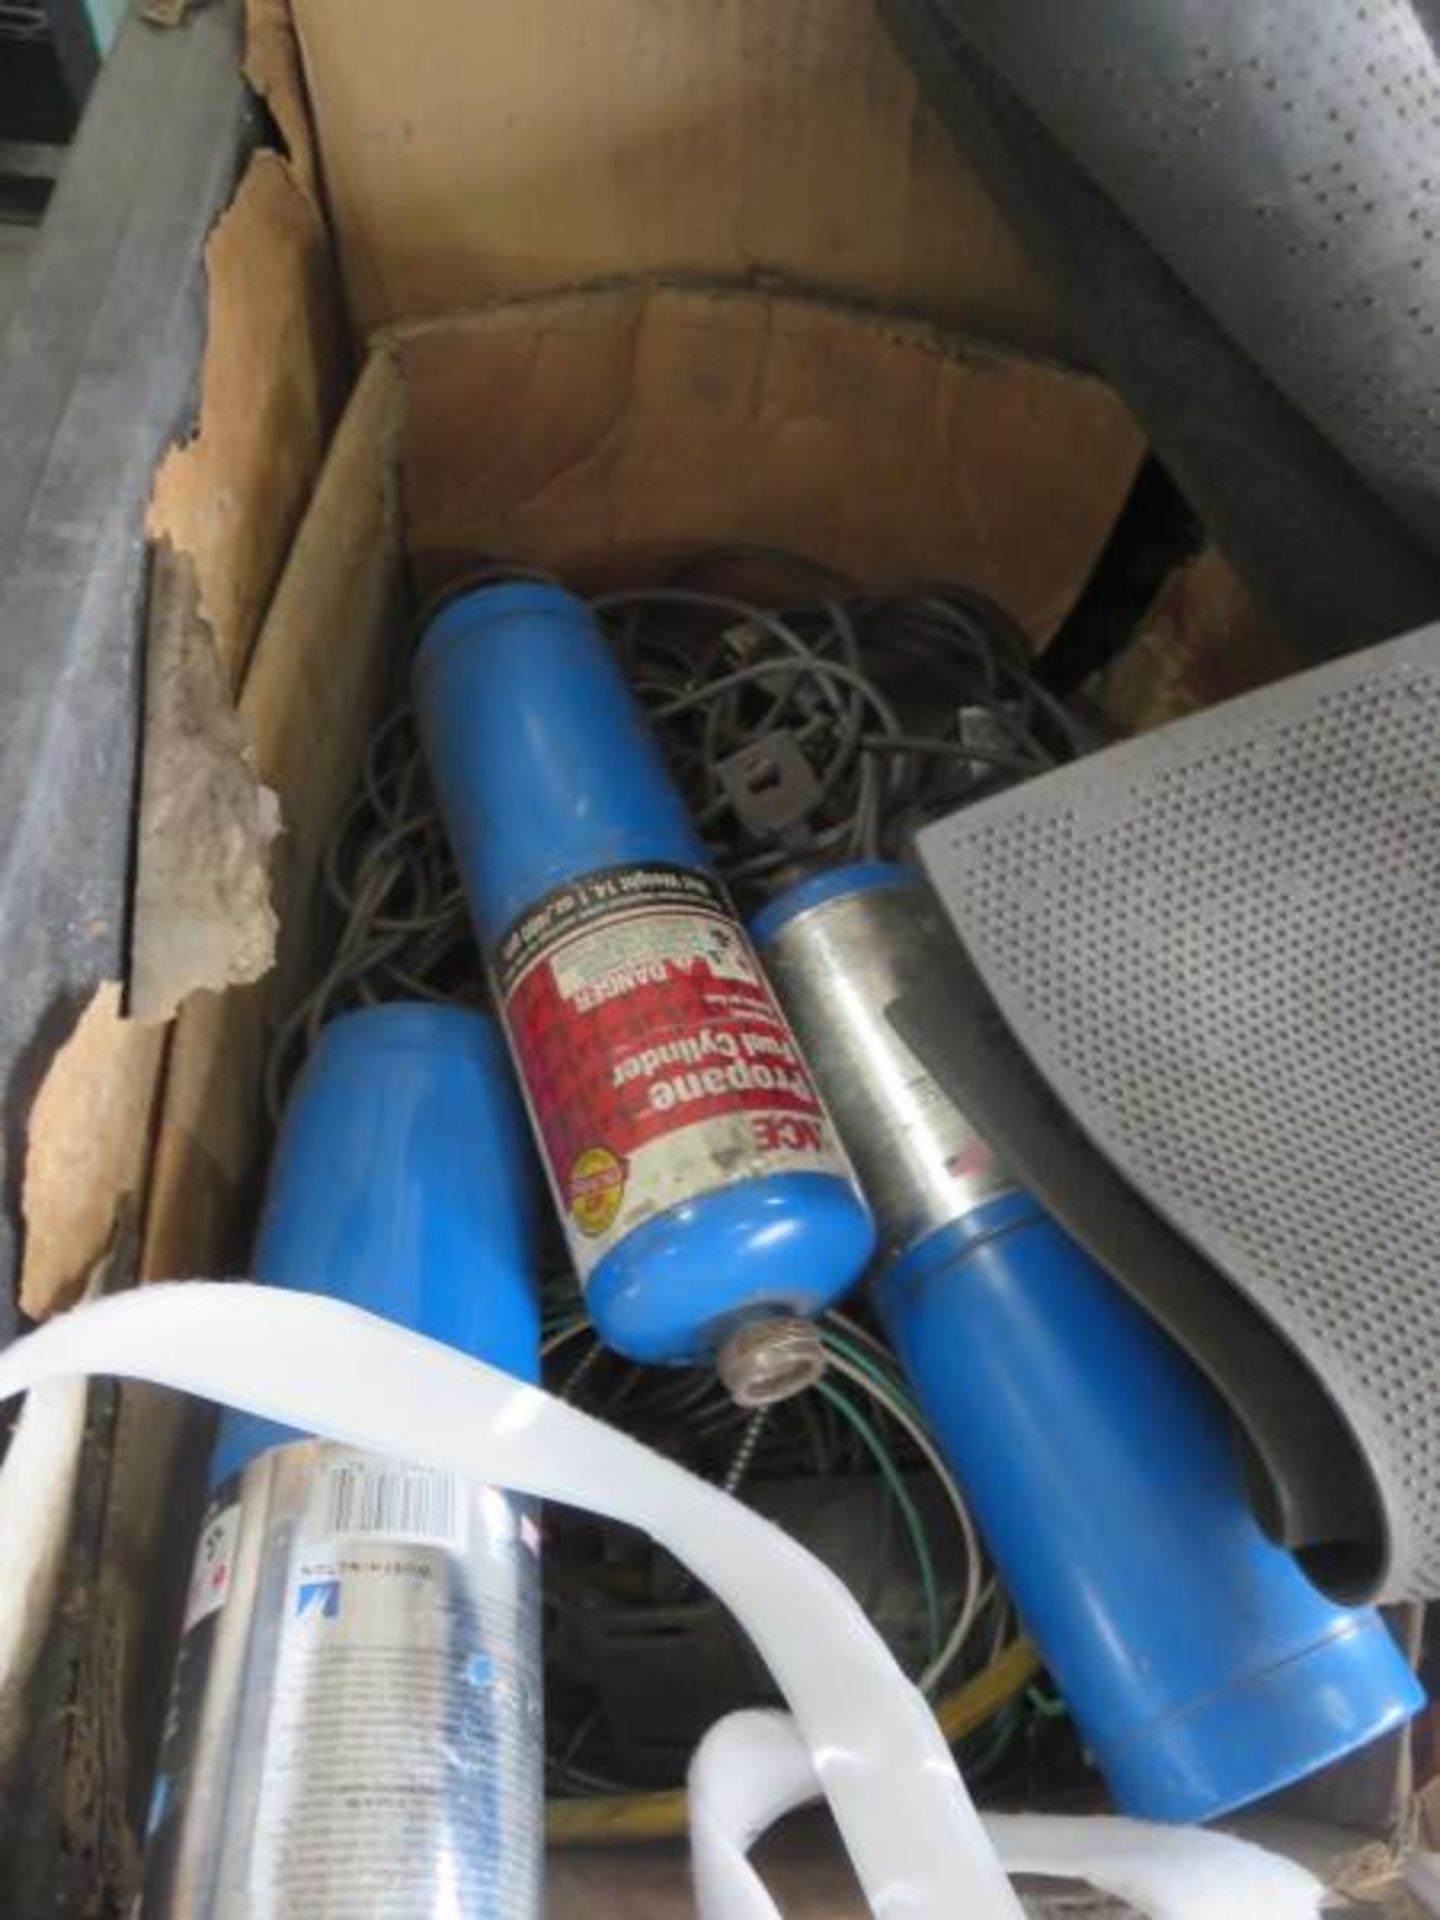 Lot (Qty 5 Skids) Consisting of pipe fittings, Electrical cords, Industrial Lights, Gear box, heavy - Bild 9 aus 18